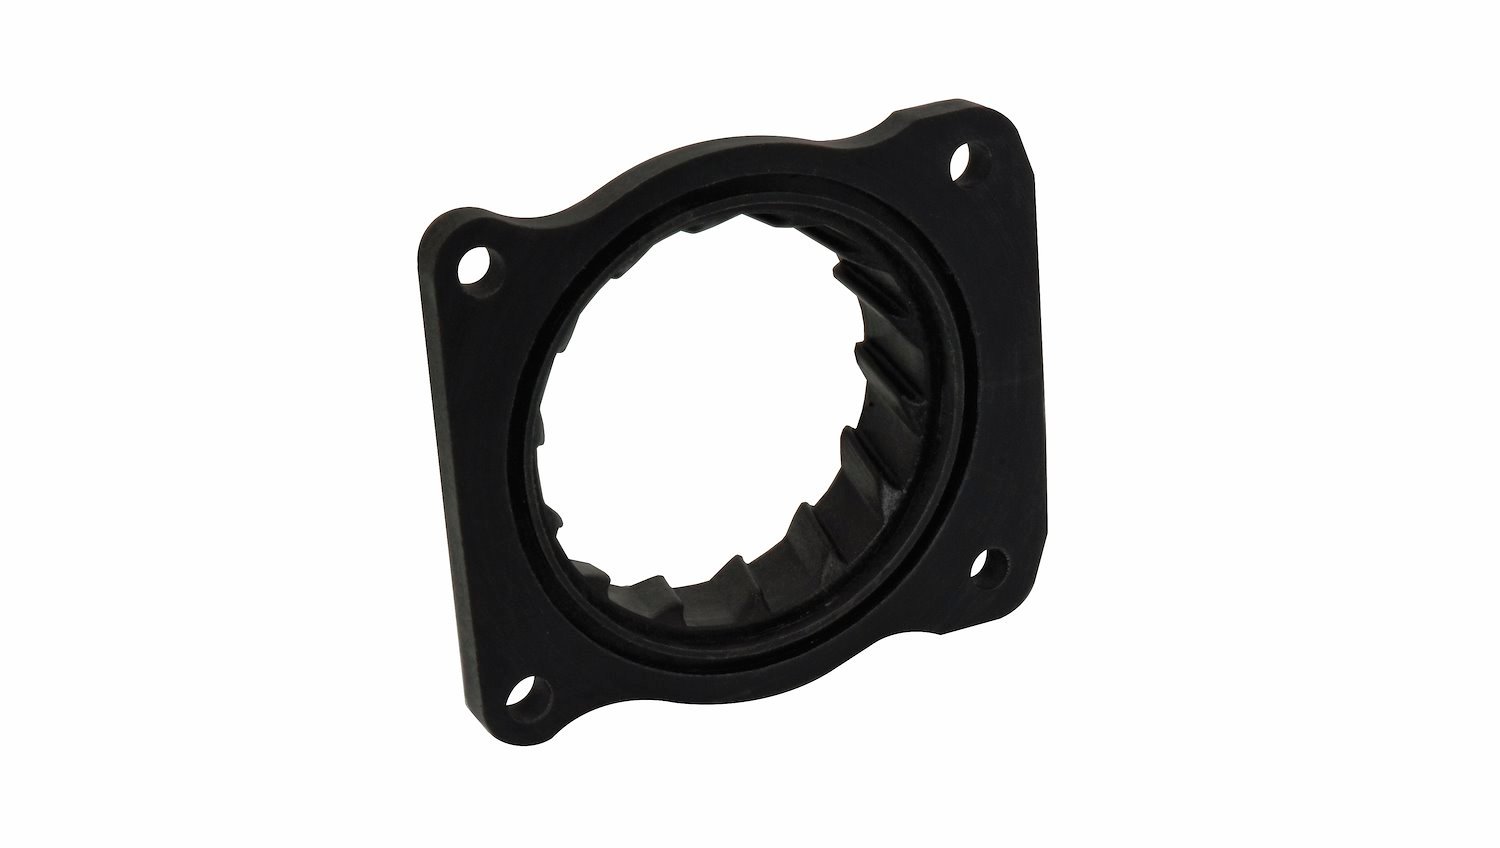 Vortice Throttle Body Spacer 2004-2010 Ford F-150/F-250/F-350 5.4L & 2005-2012 Ford Expedition 5.4L